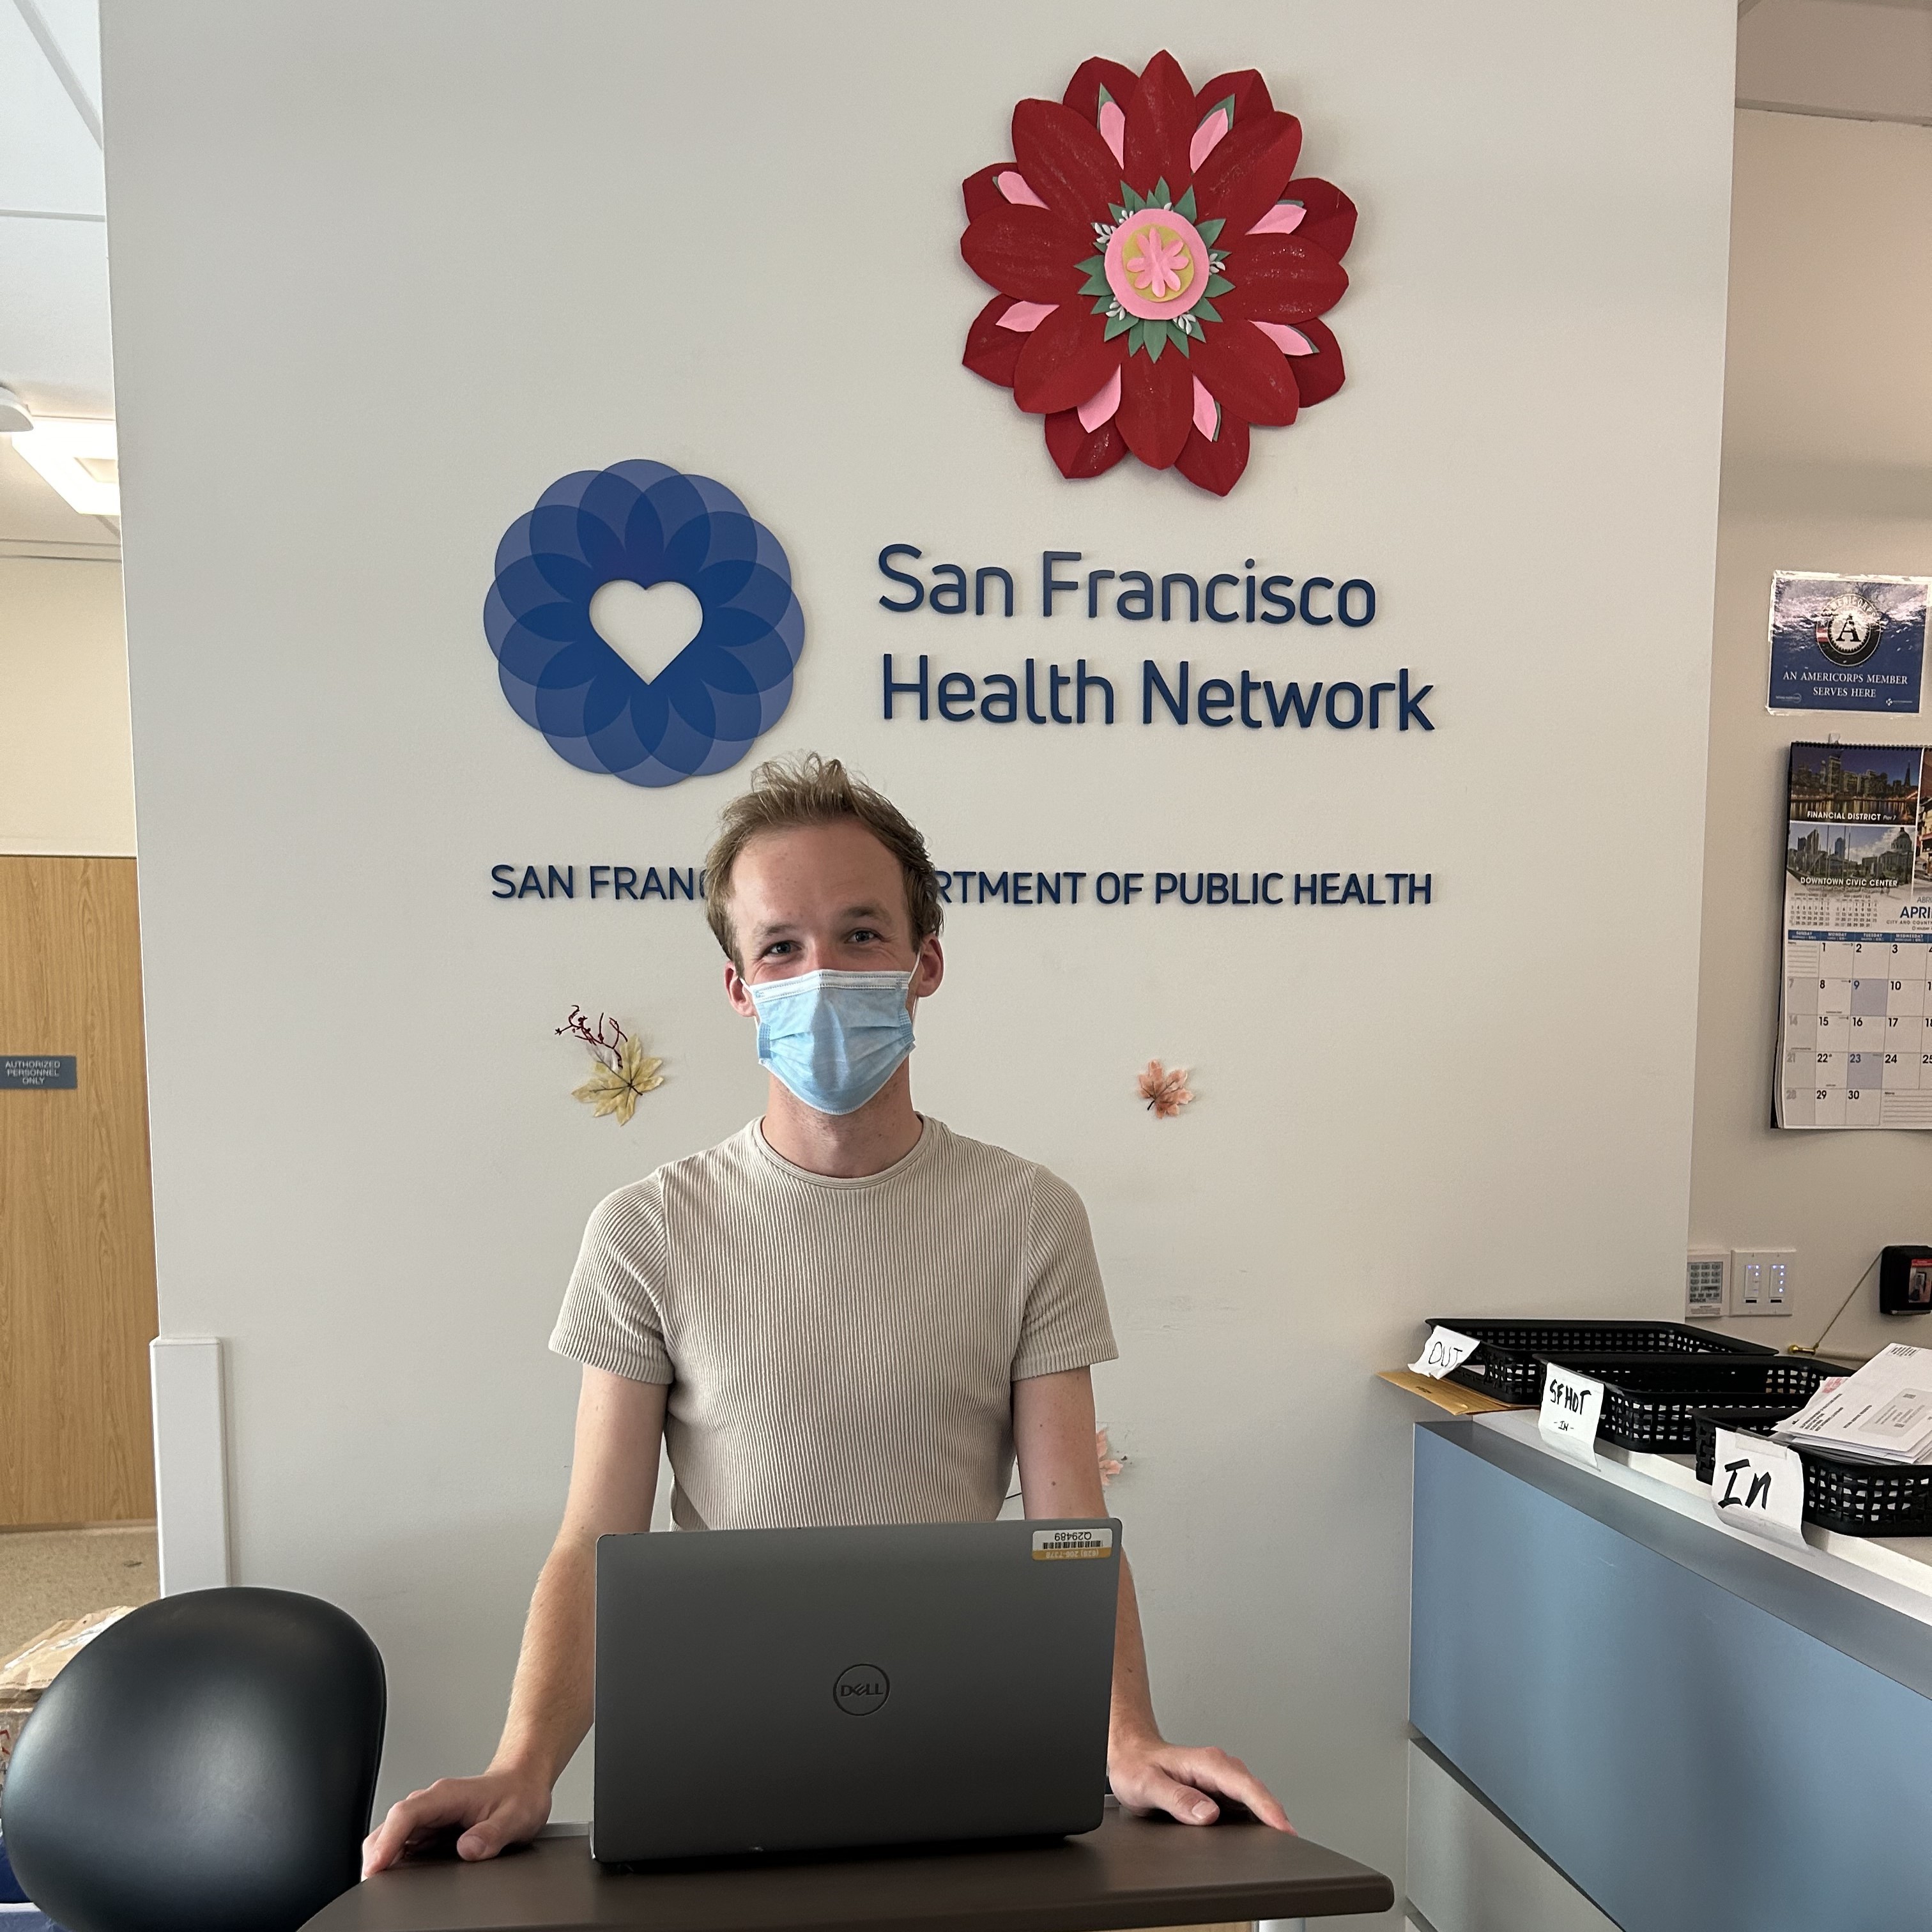 ​John Hansen is standing and facing the camera. Behind them is the San Francisco Health Network logo. [Click and drag to move] ​